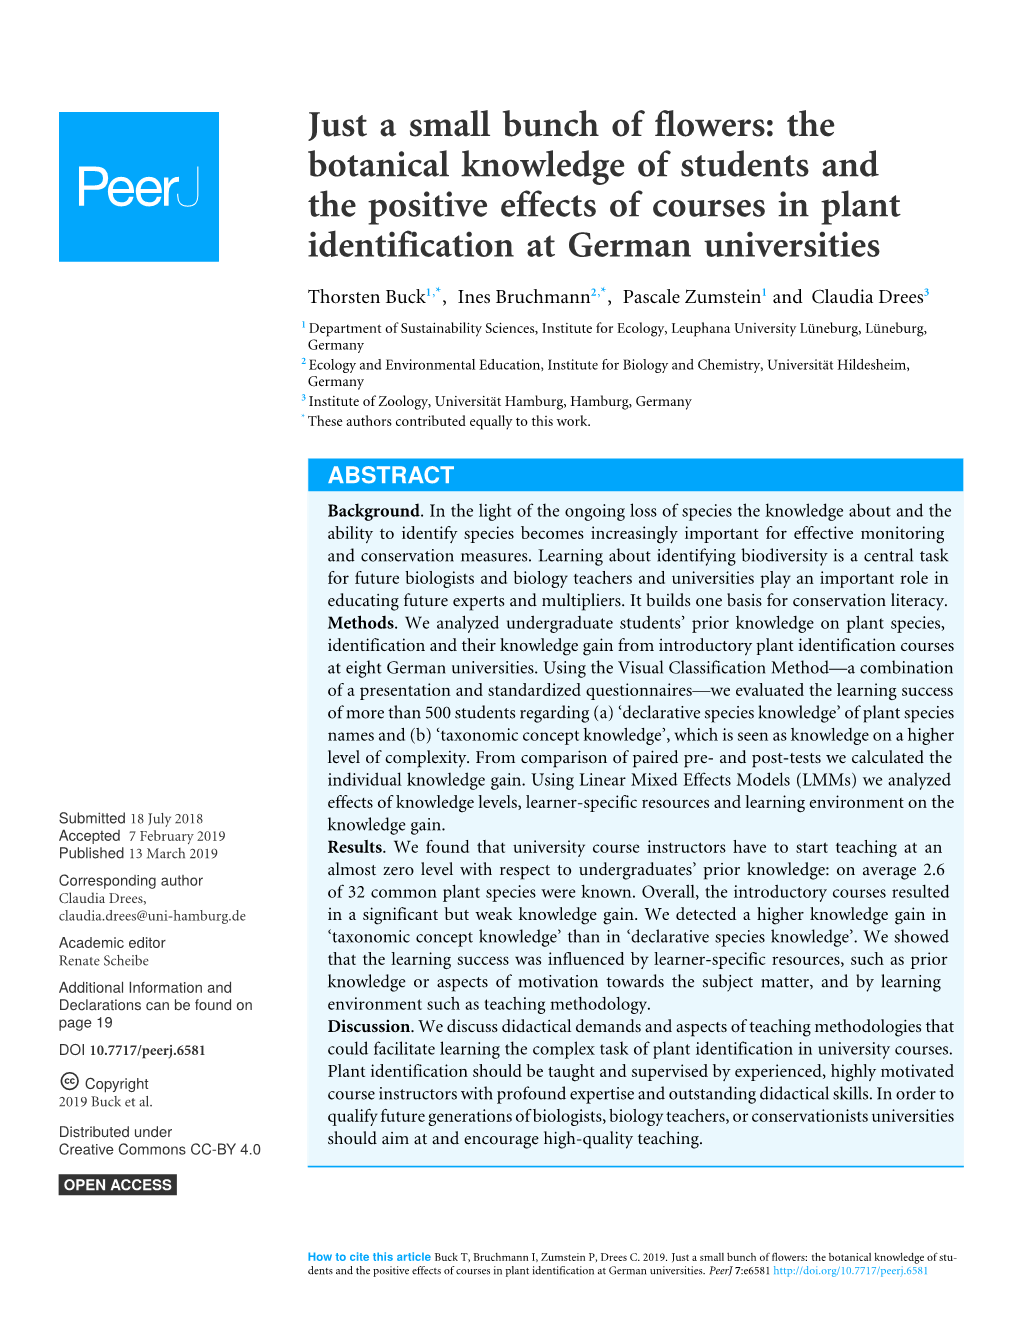 The Botanical Knowledge of Students and the Positive Effects of Courses in Plant Identification at German Universities